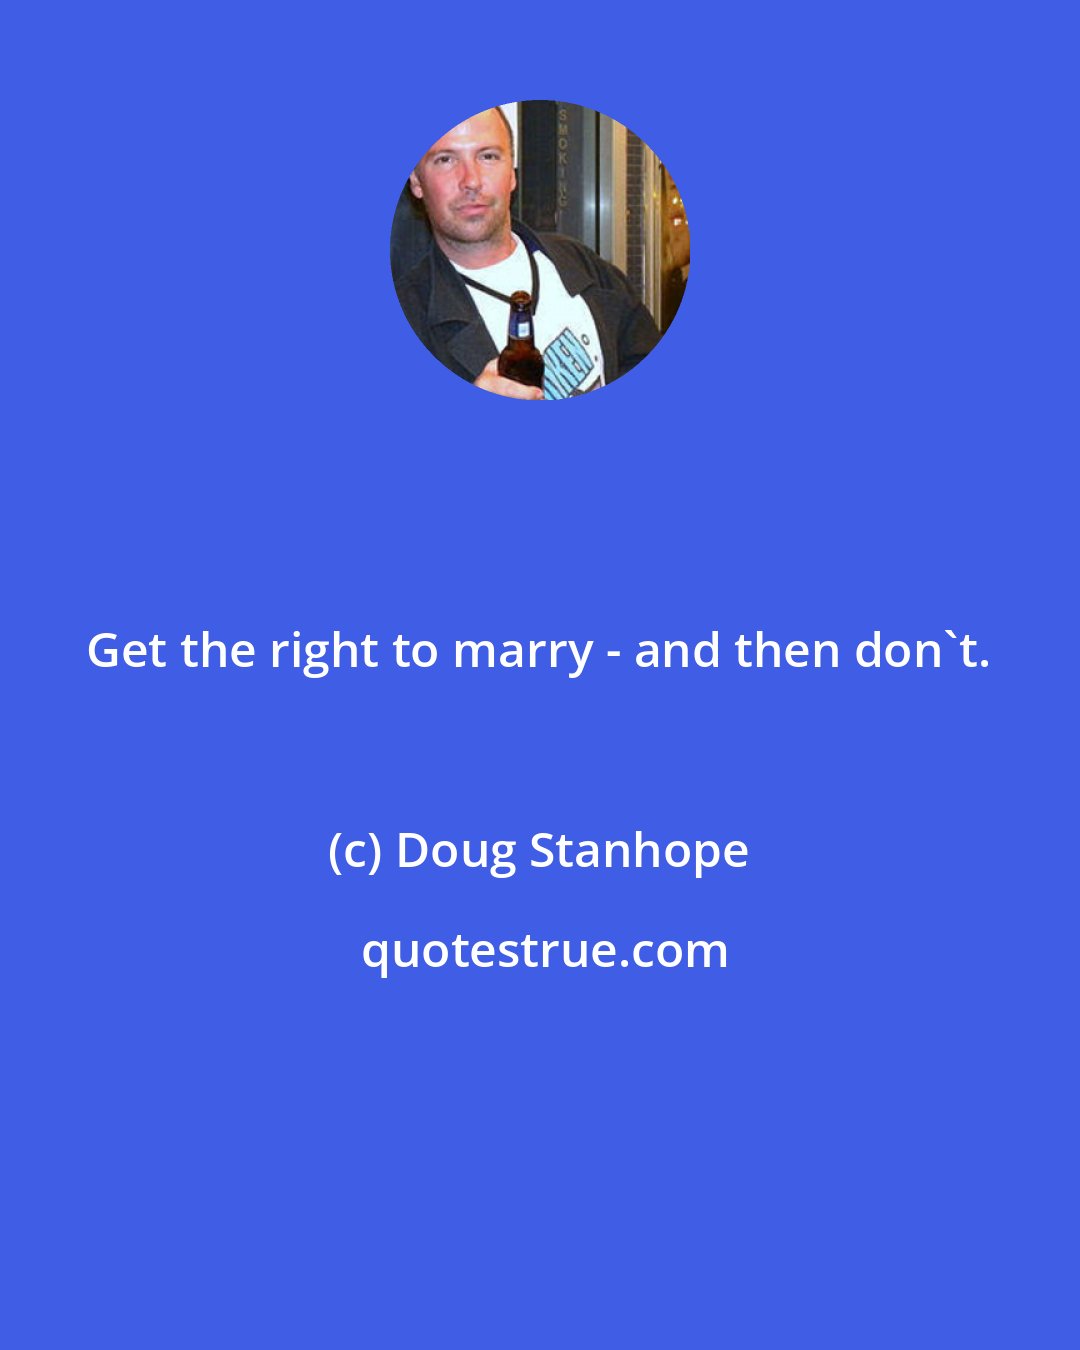 Doug Stanhope: Get the right to marry - and then don't.